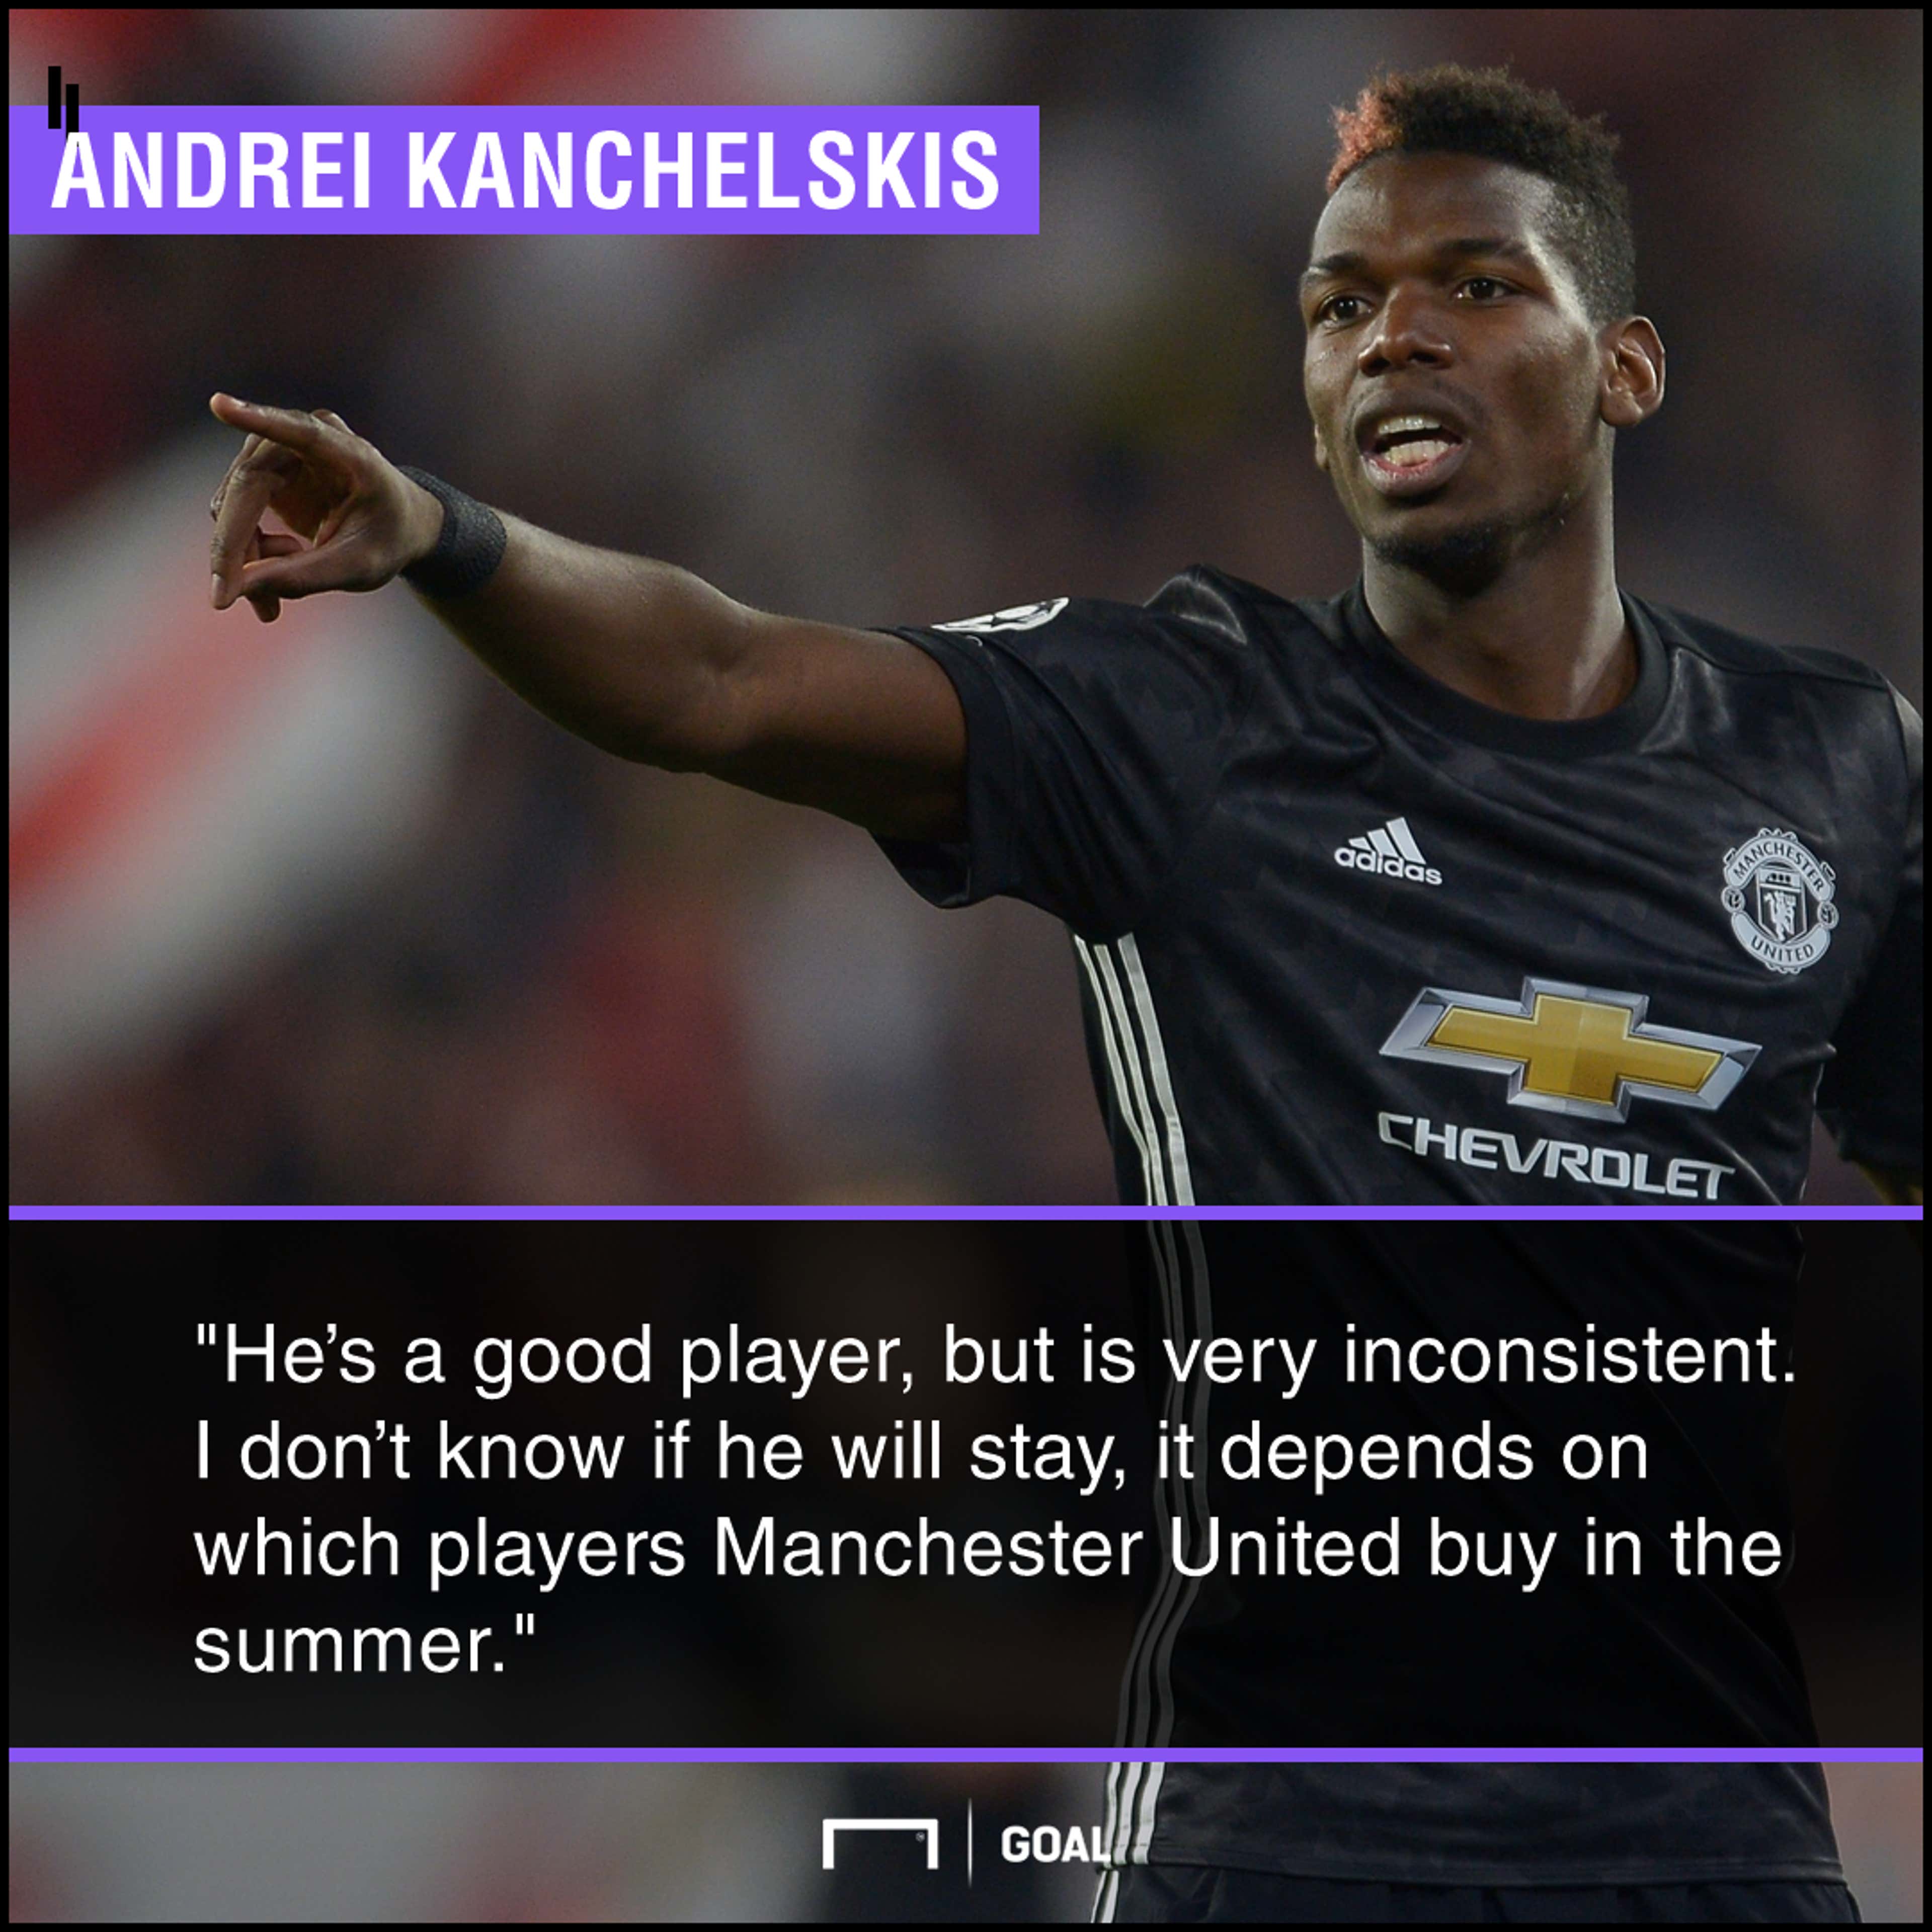 Paul Pogba inconsistent may leave Andrei Kanchelskis